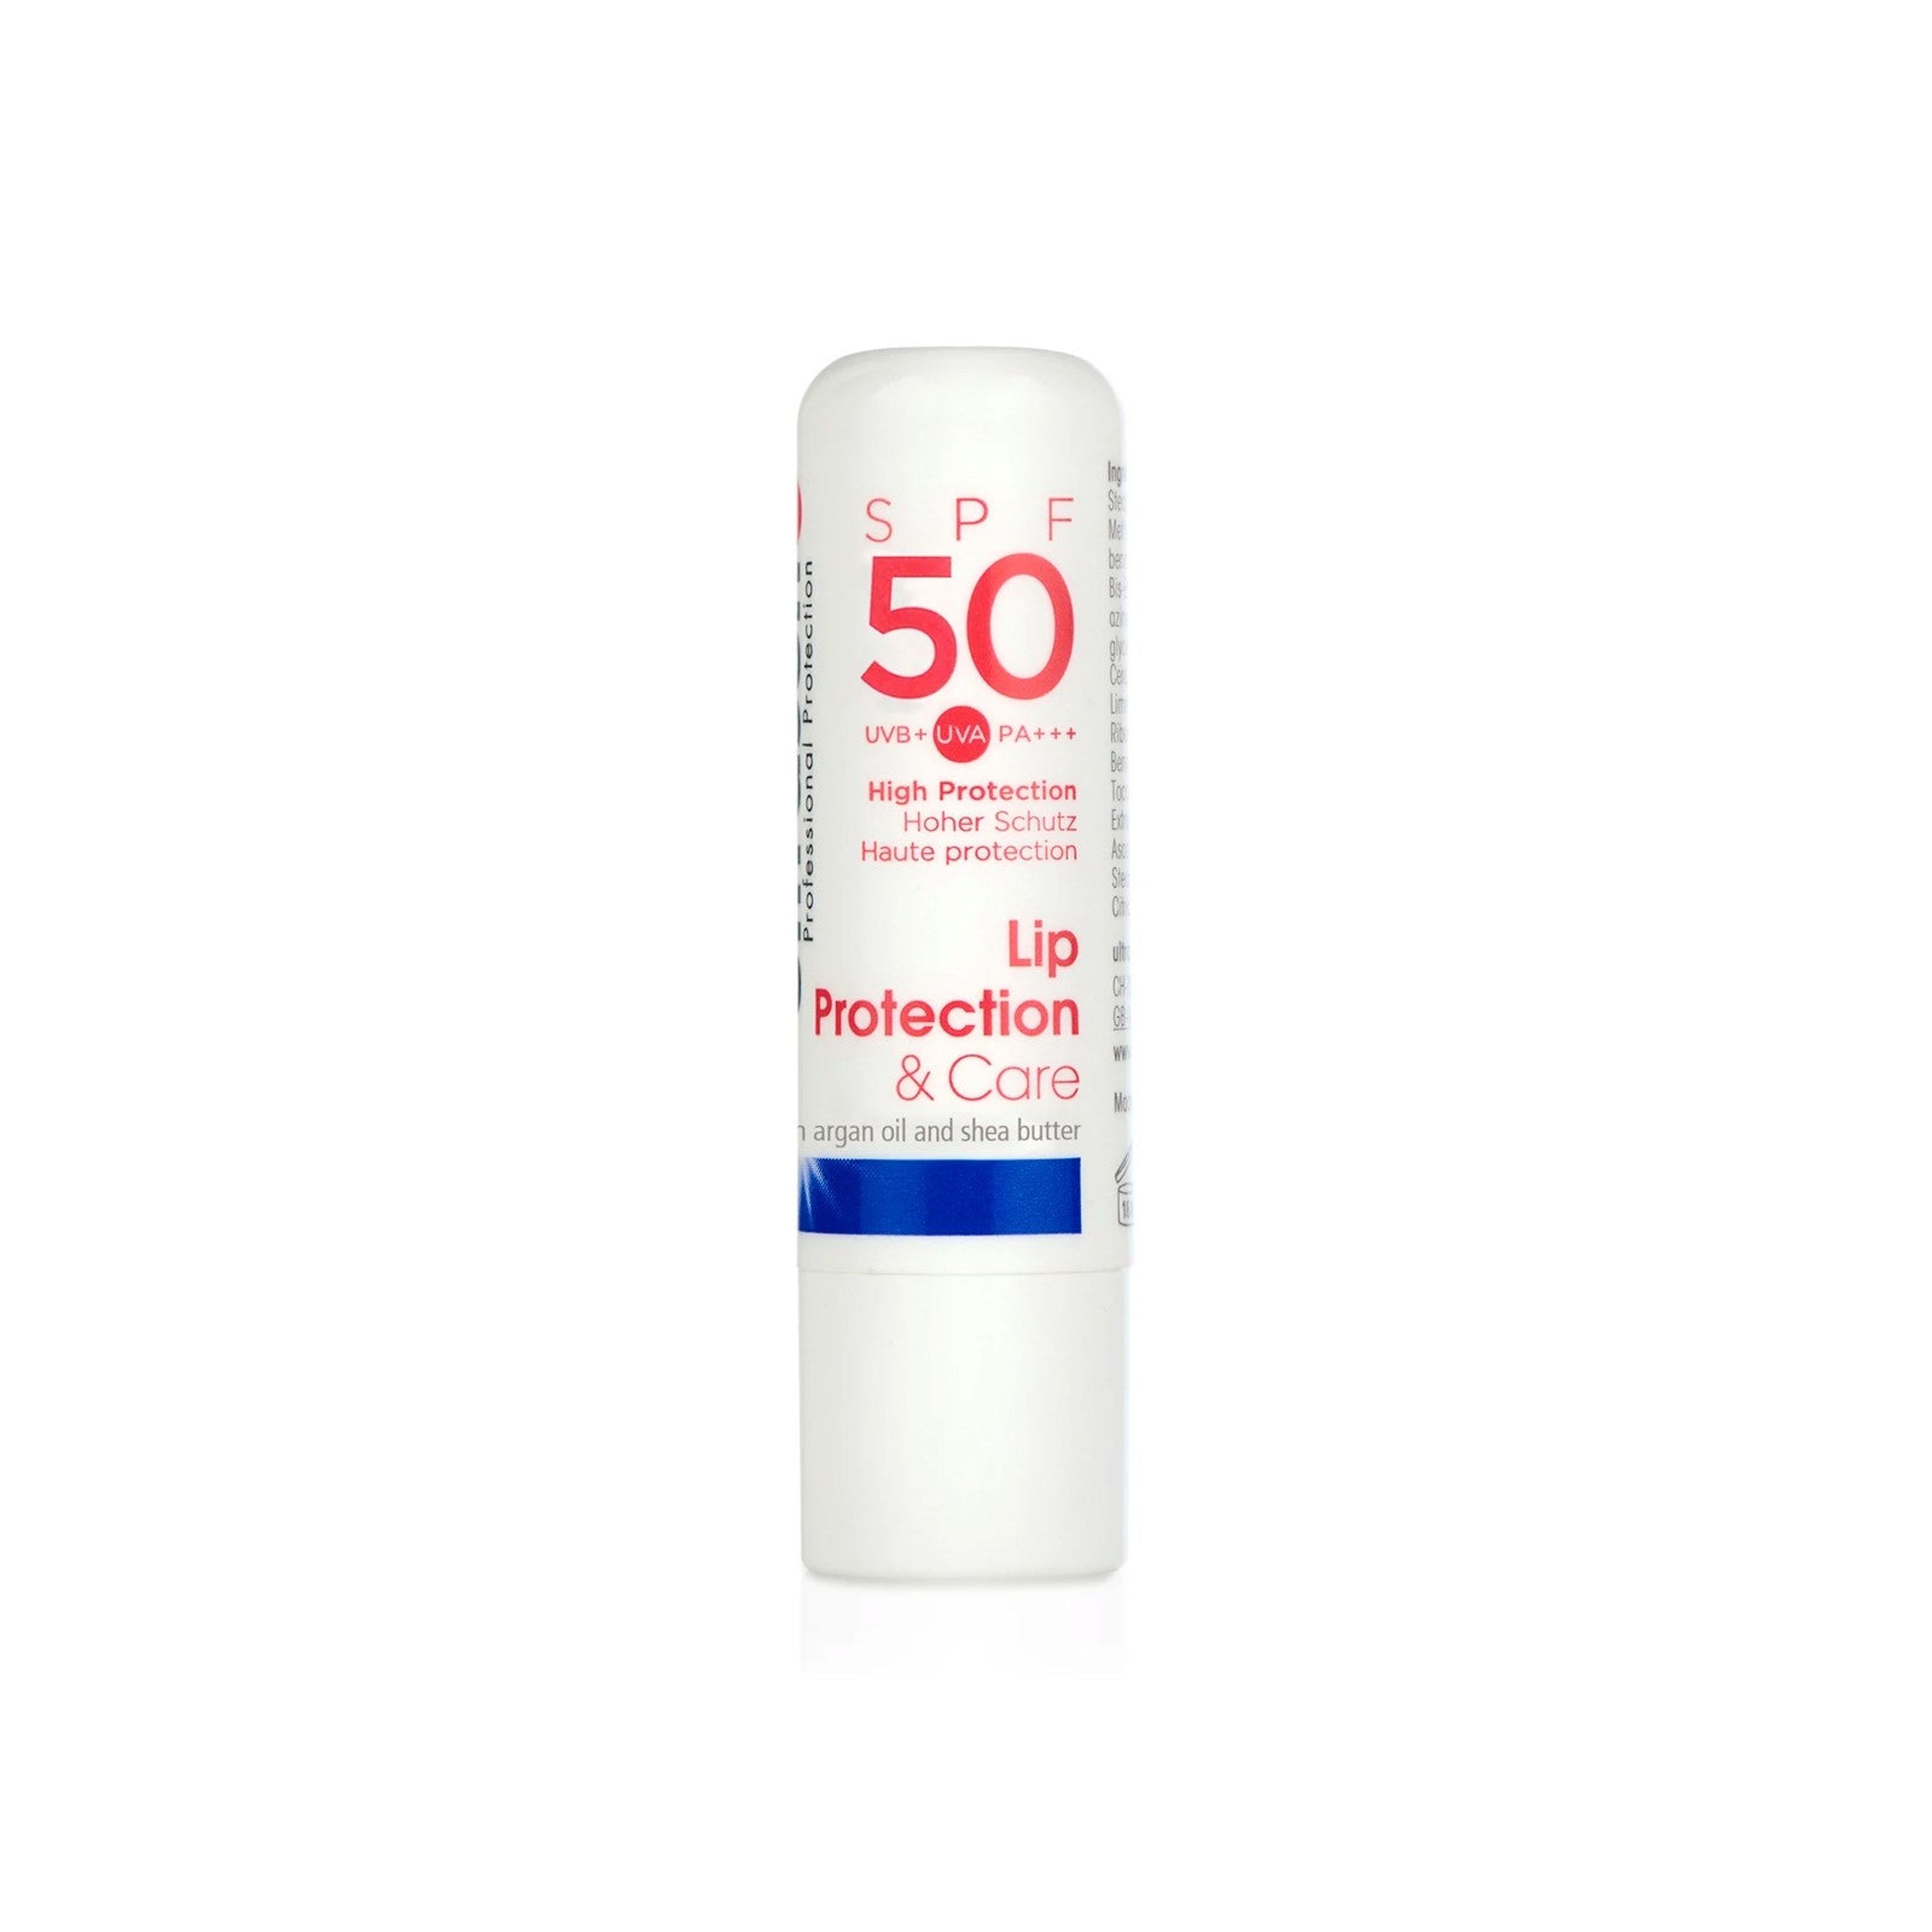 Lip Protection SPF 50 image 1 expanded